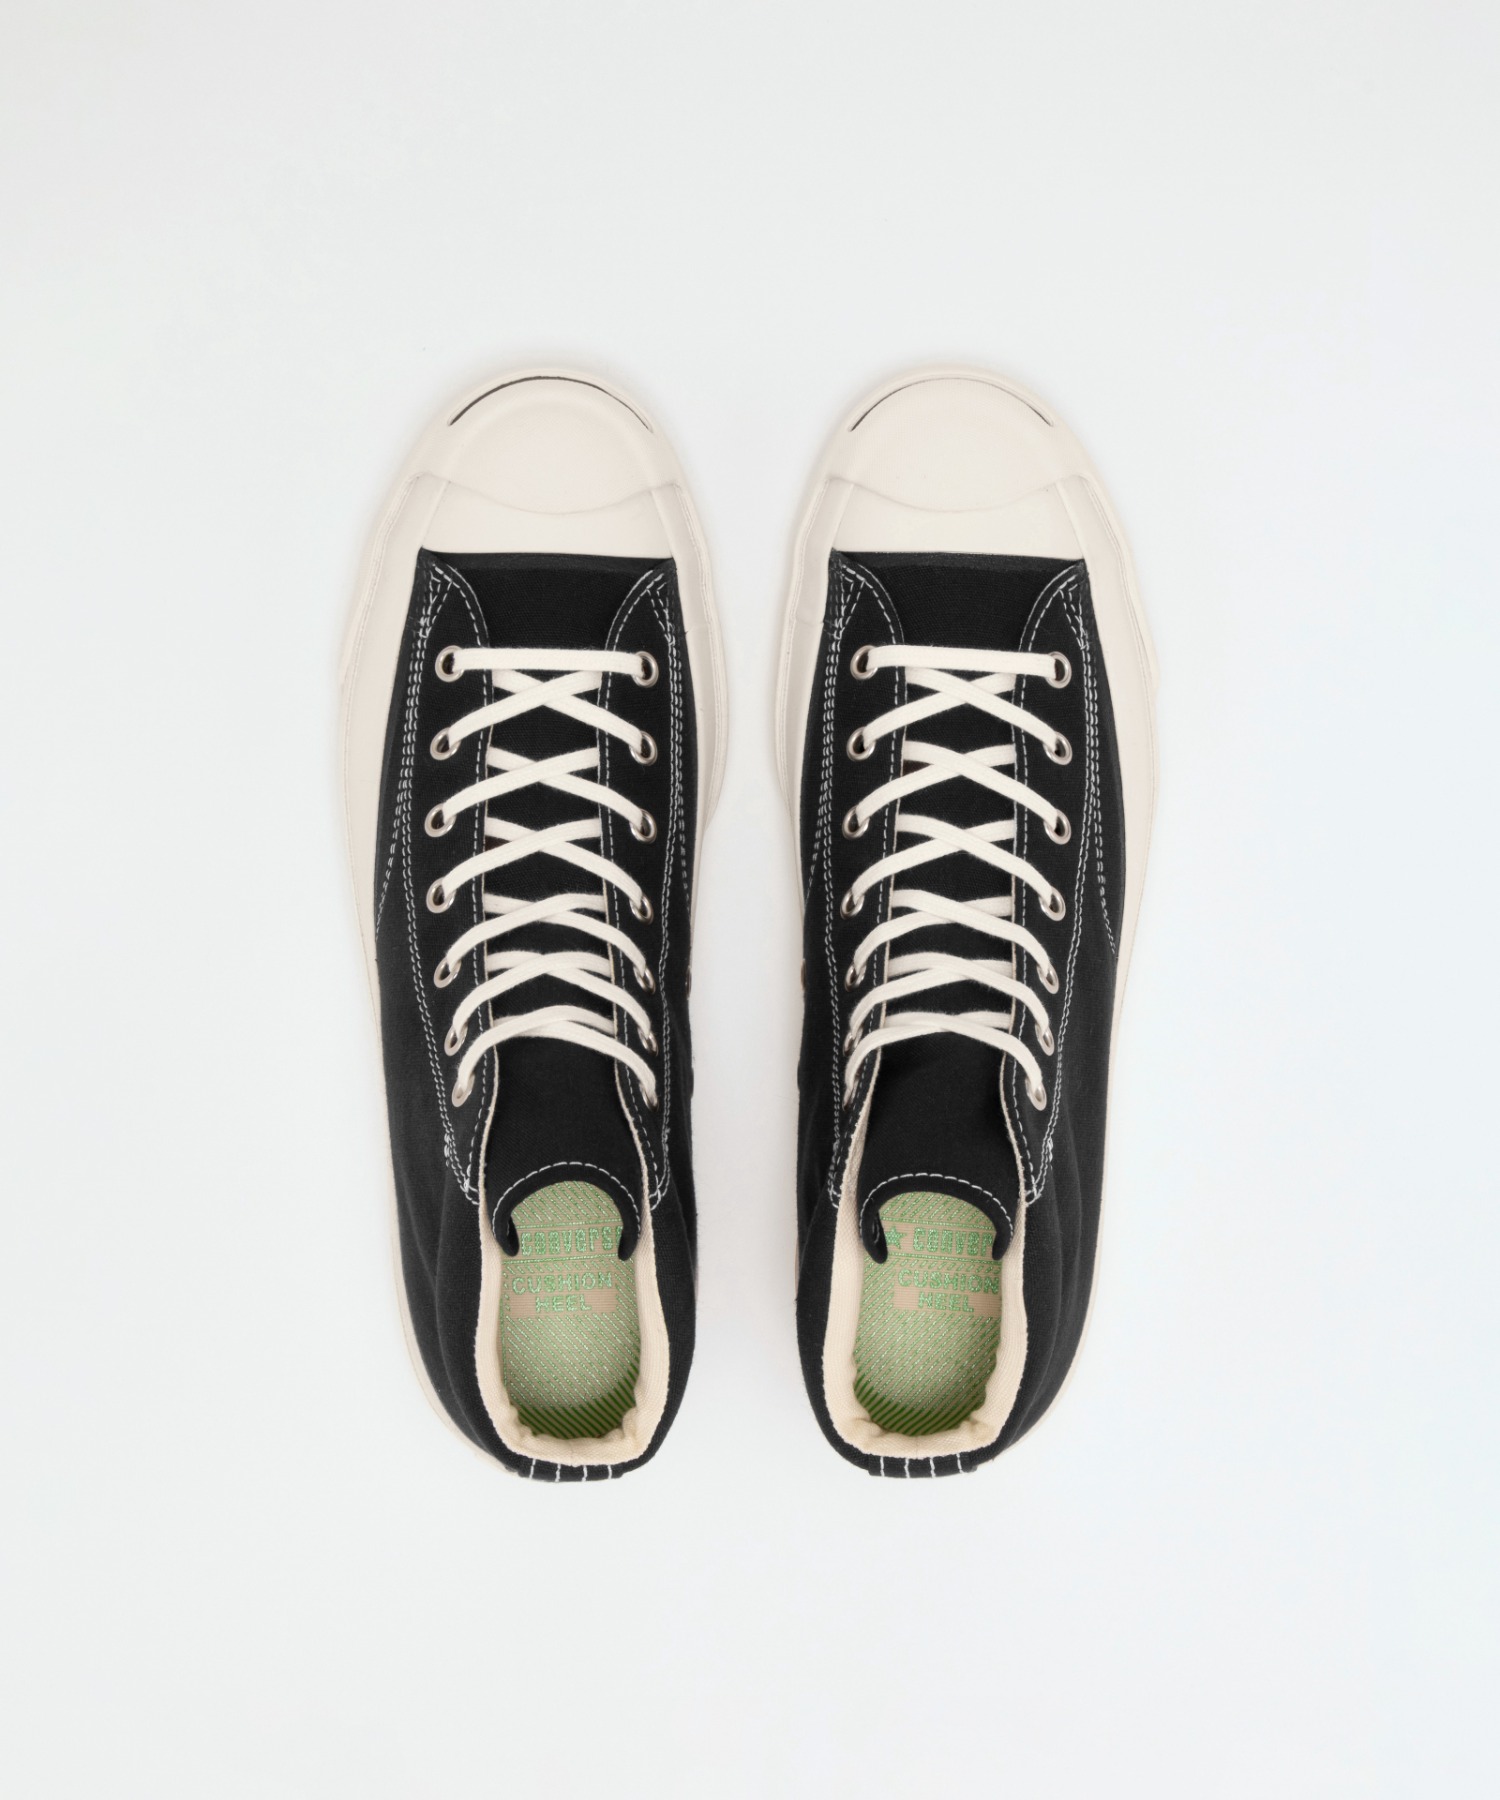 CONVERSE ADDICT【JACK PURCELL CANVAS MID】 Mister hollywood│N ...